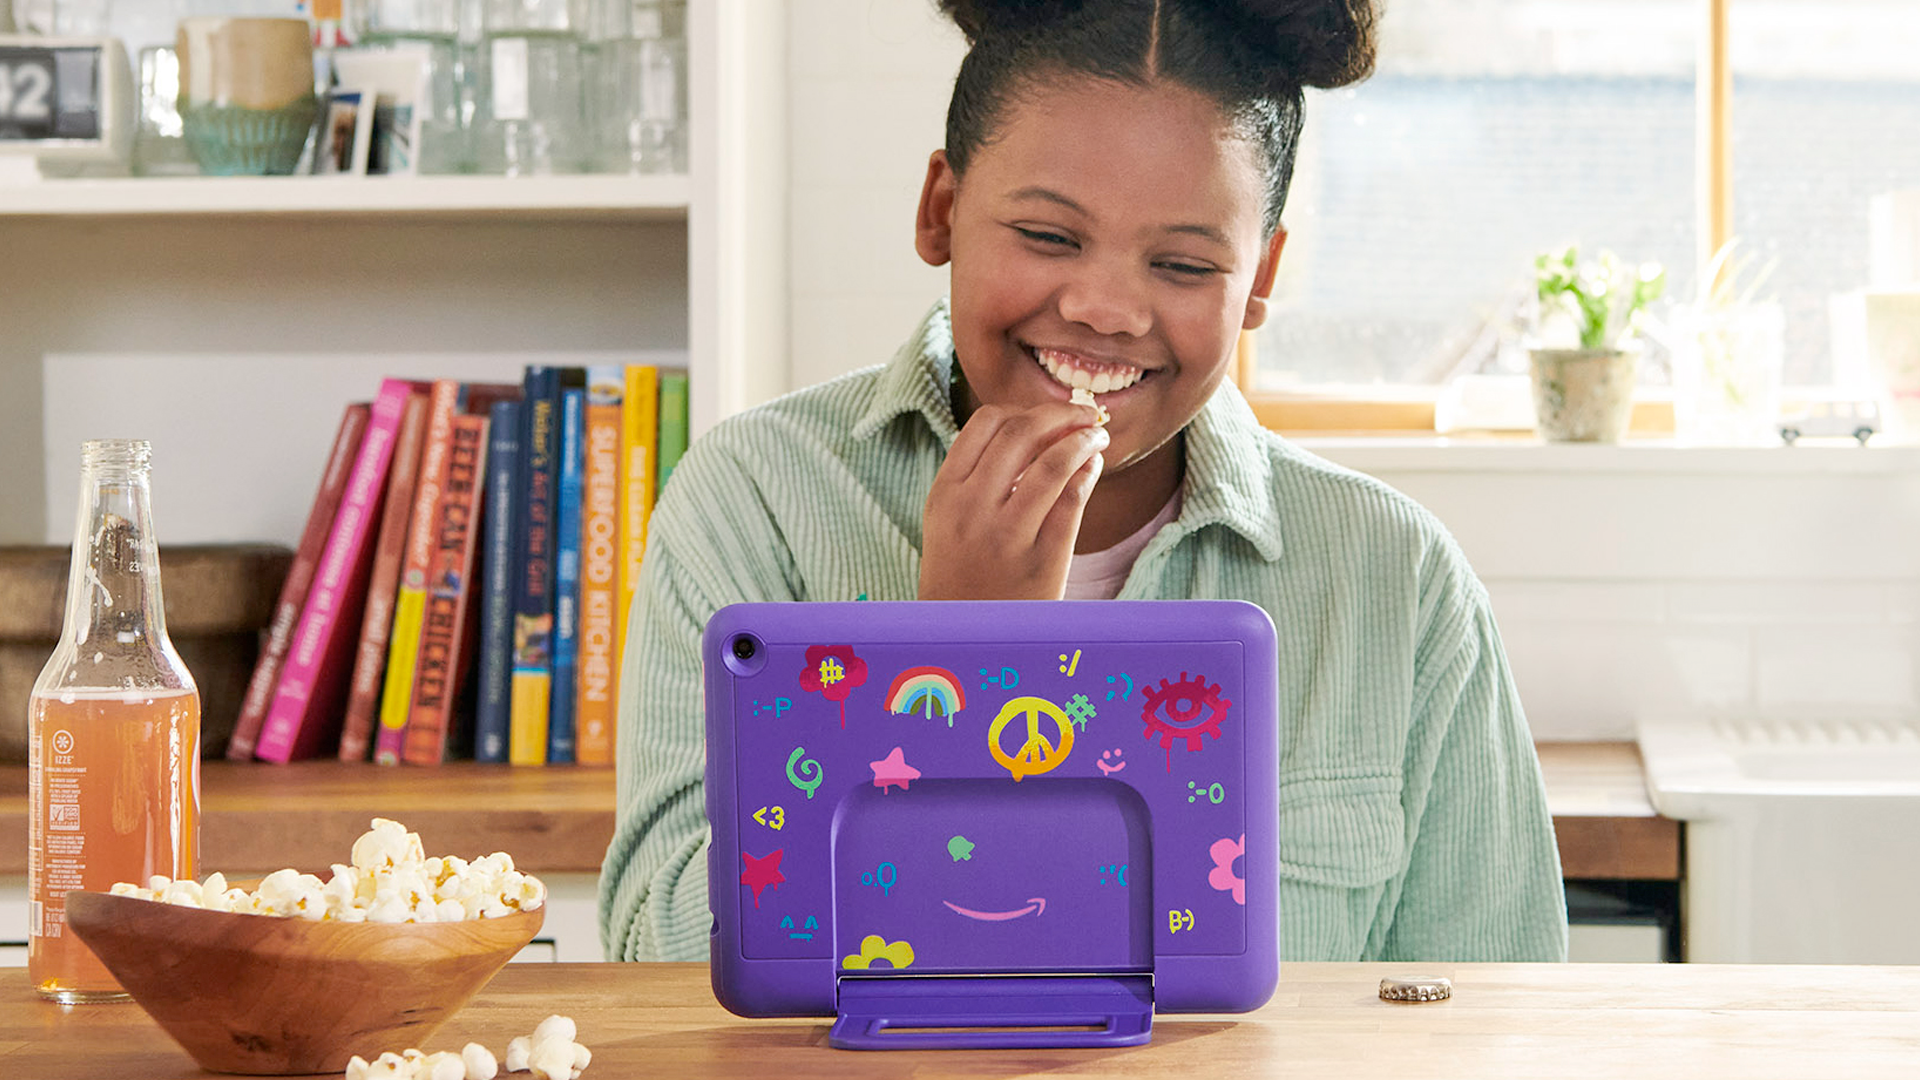 The Fire HD 8 Pro Kids Edition tablet.